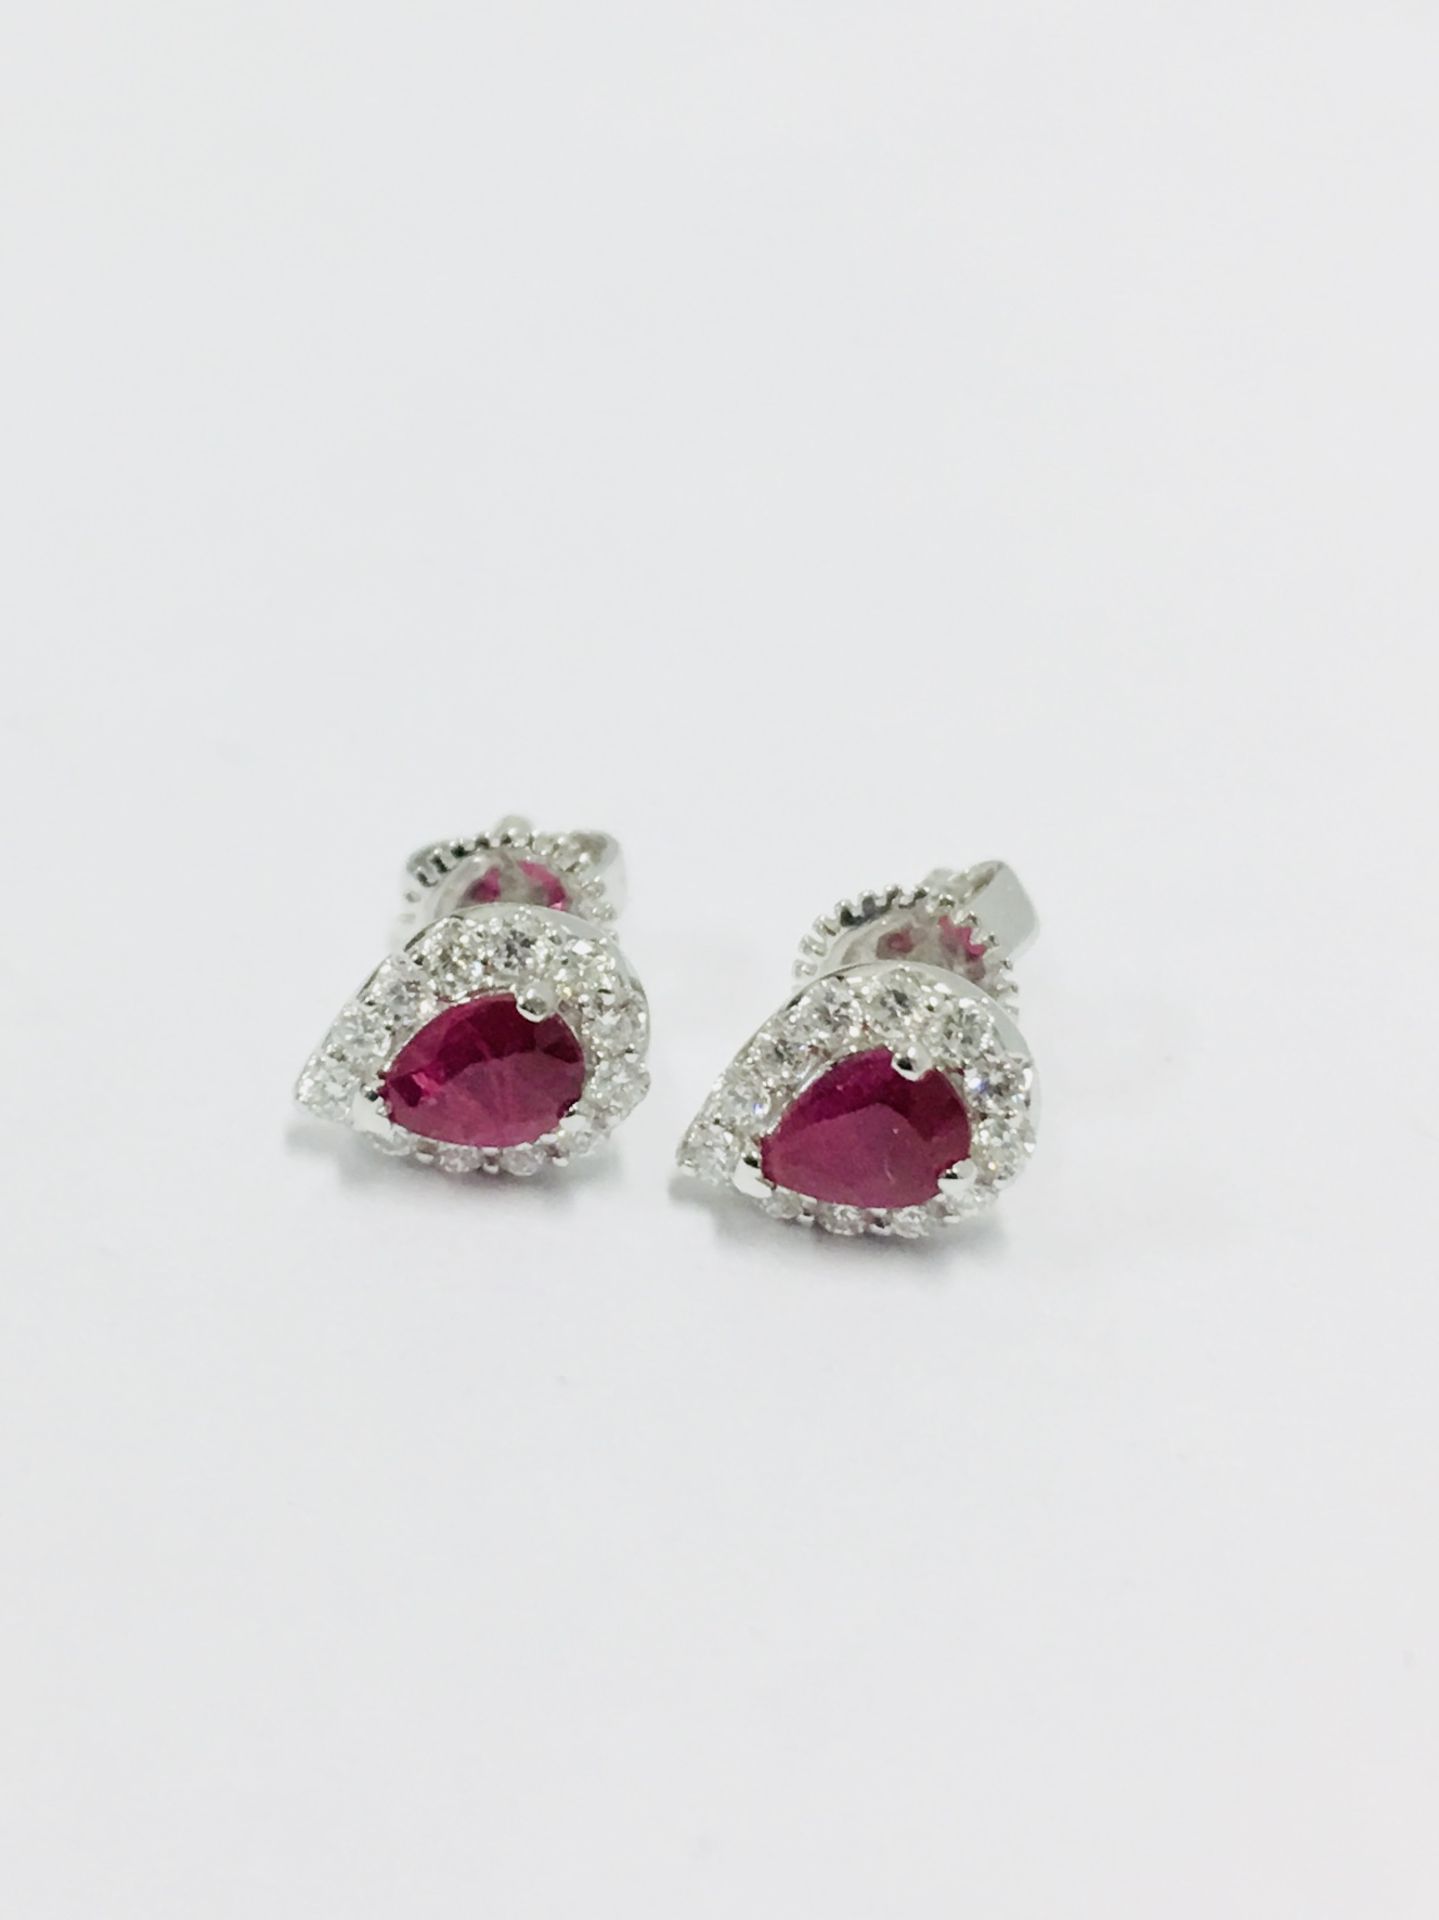 18ct white gold Ruby & Diamond Earrings,Ruby 0.58ct pearshape natural,0.17ct diamond brilliant cut g - Image 2 of 3